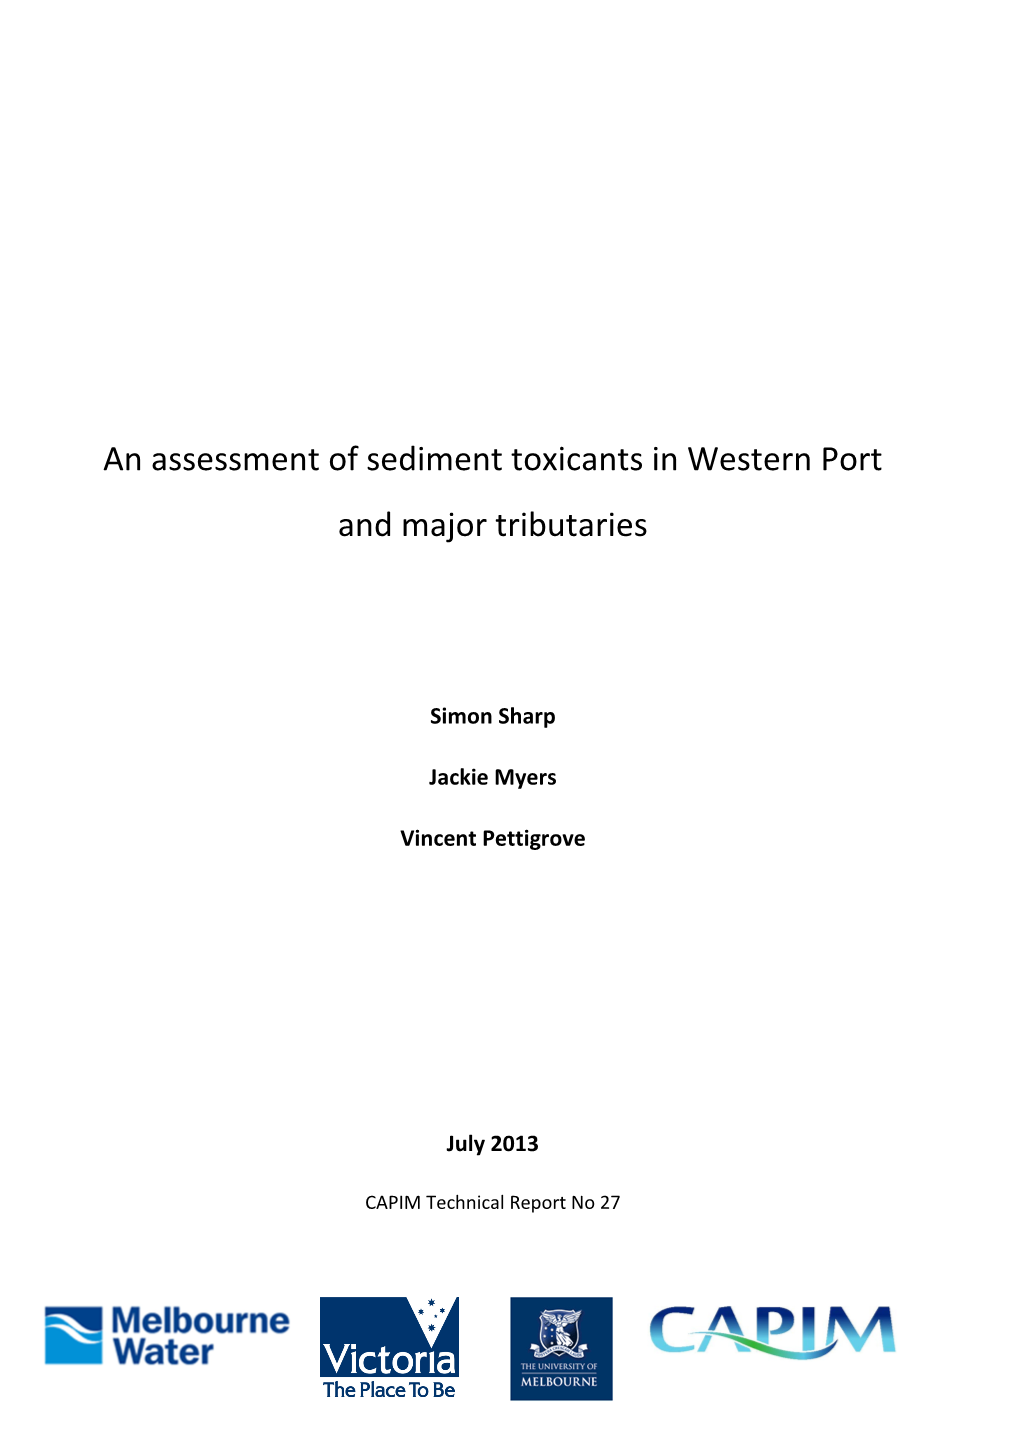 An Assessment of Sediment Toxicants in Western Port and Major Tributaries